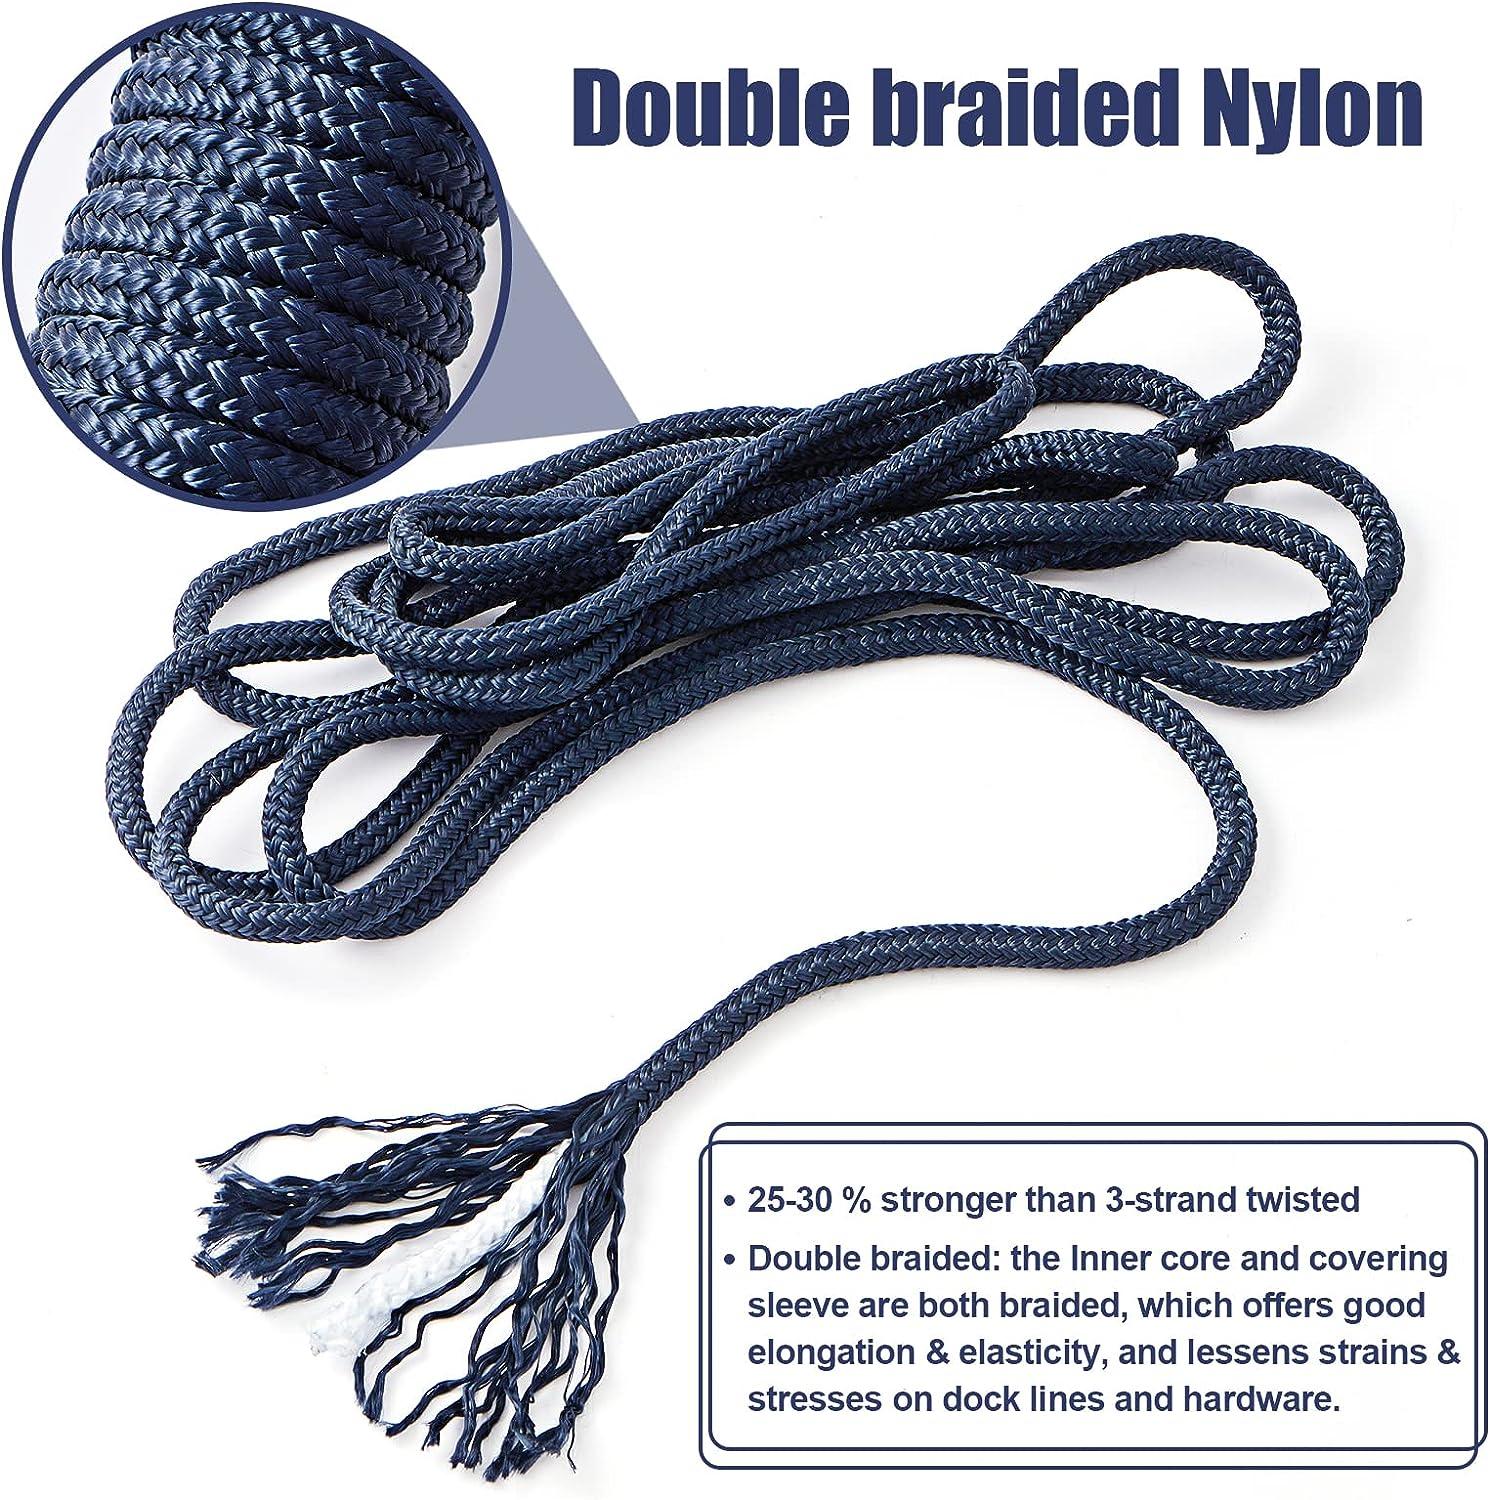 TetherTite Dock Line 1/2 Inch 25 Ft, Marine-Grade Double-Braided Nylon Dock  Line for Boats with 12 Eyelet, Hi-Quality Pre-Shrunk & Heat Stabilized Boat  Docking Rope Mooring Line - 2 Pack Navy Blue